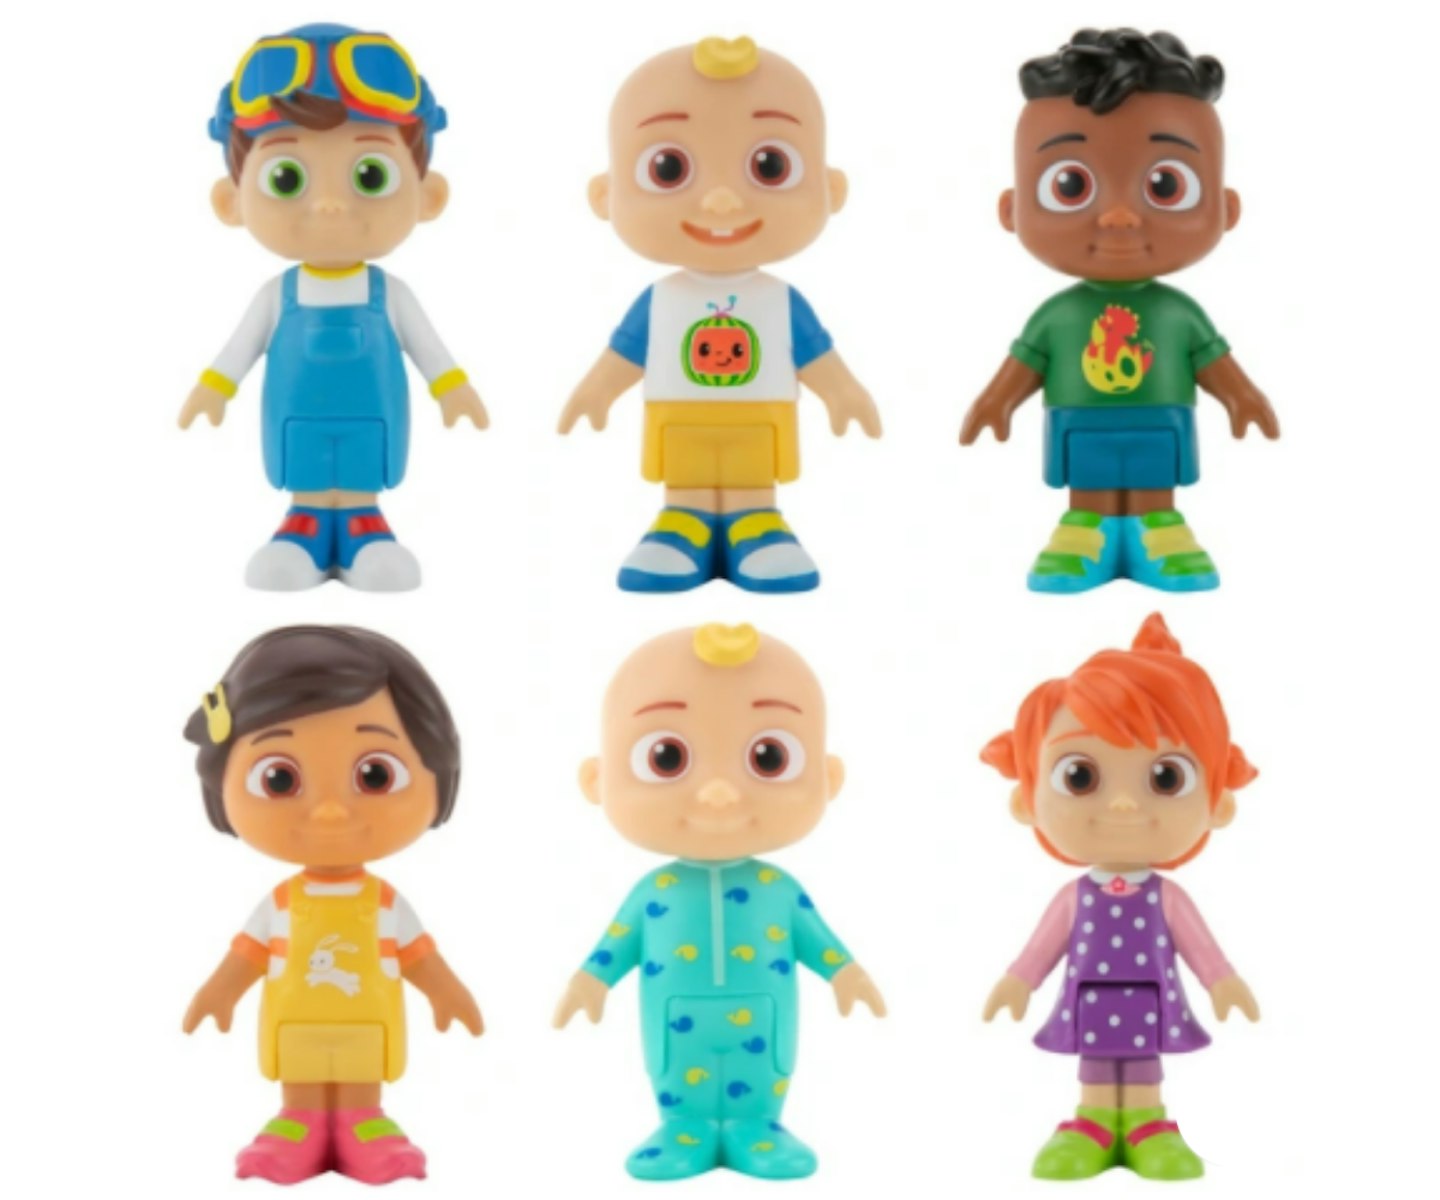 CoComelon Range Available at Smyths Toys 